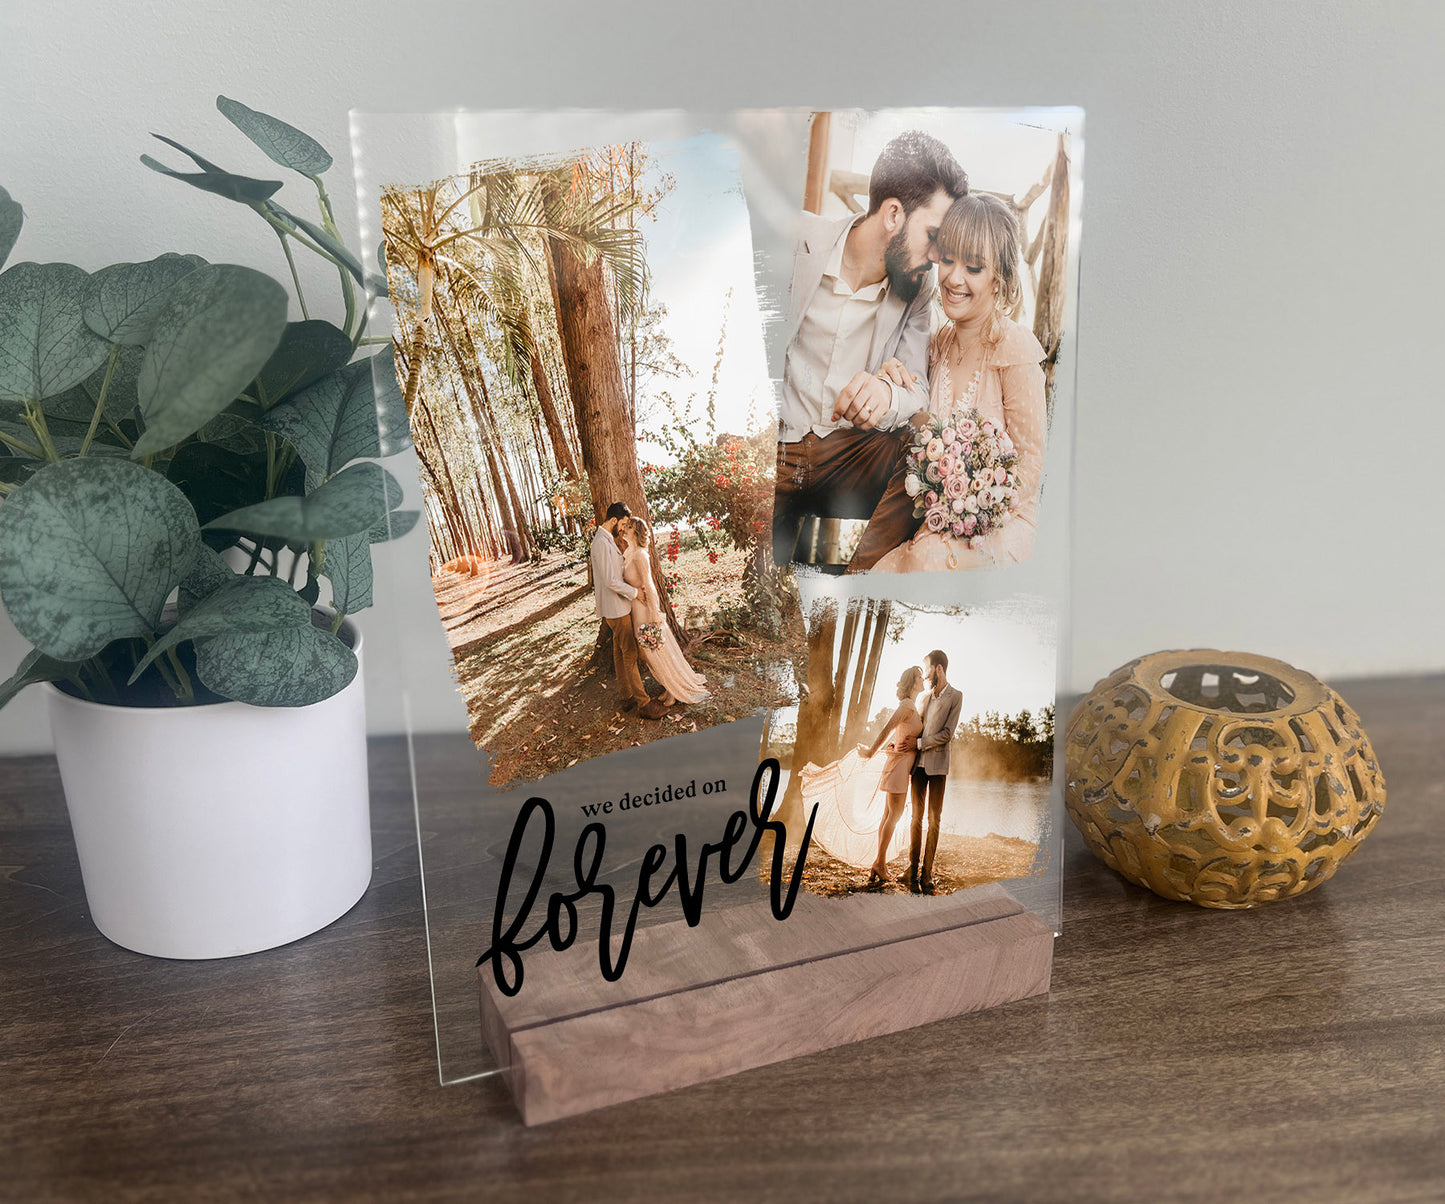 We Decided on Forever Acrylic Photo Plaque Vertical